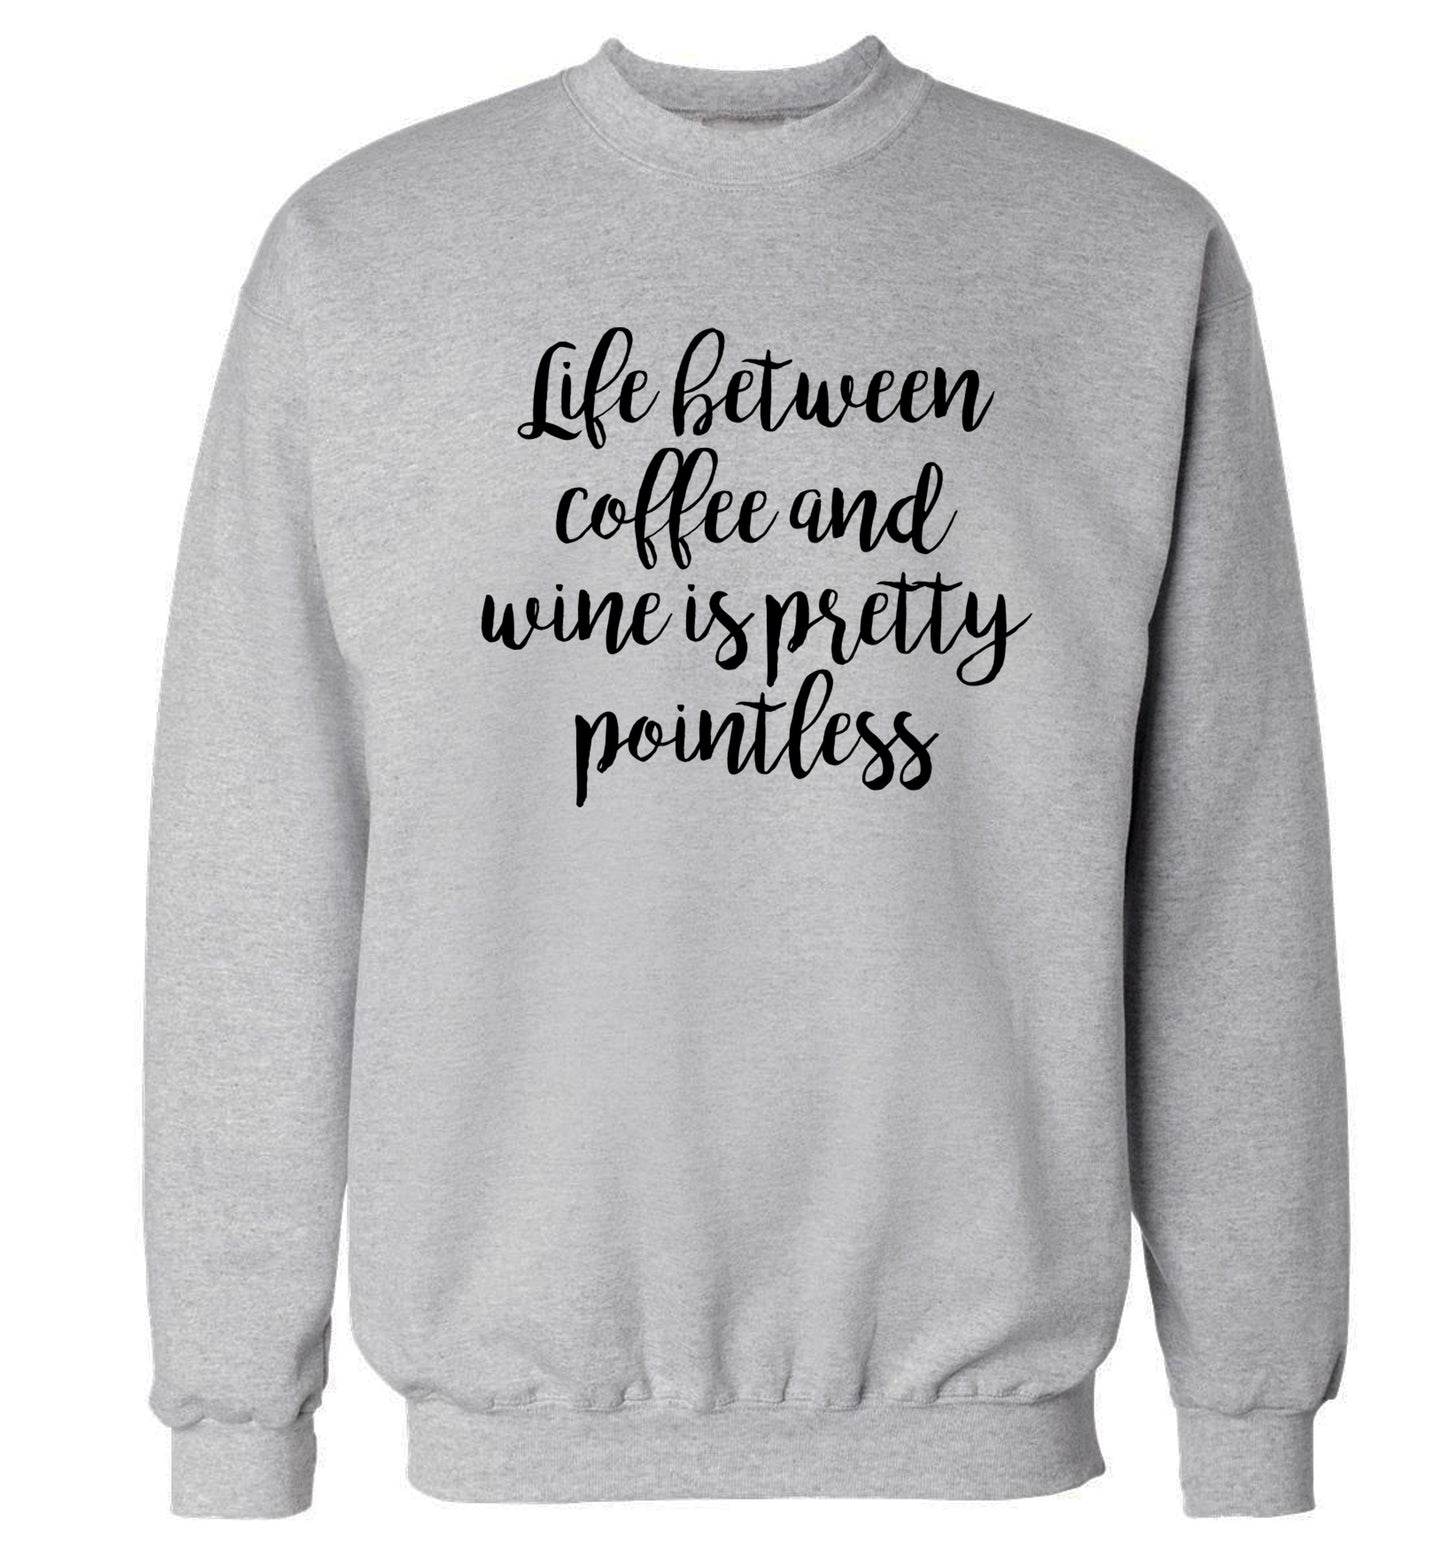 Life between coffee and wine is pretty pointless Adult's unisex grey Sweater 2XL